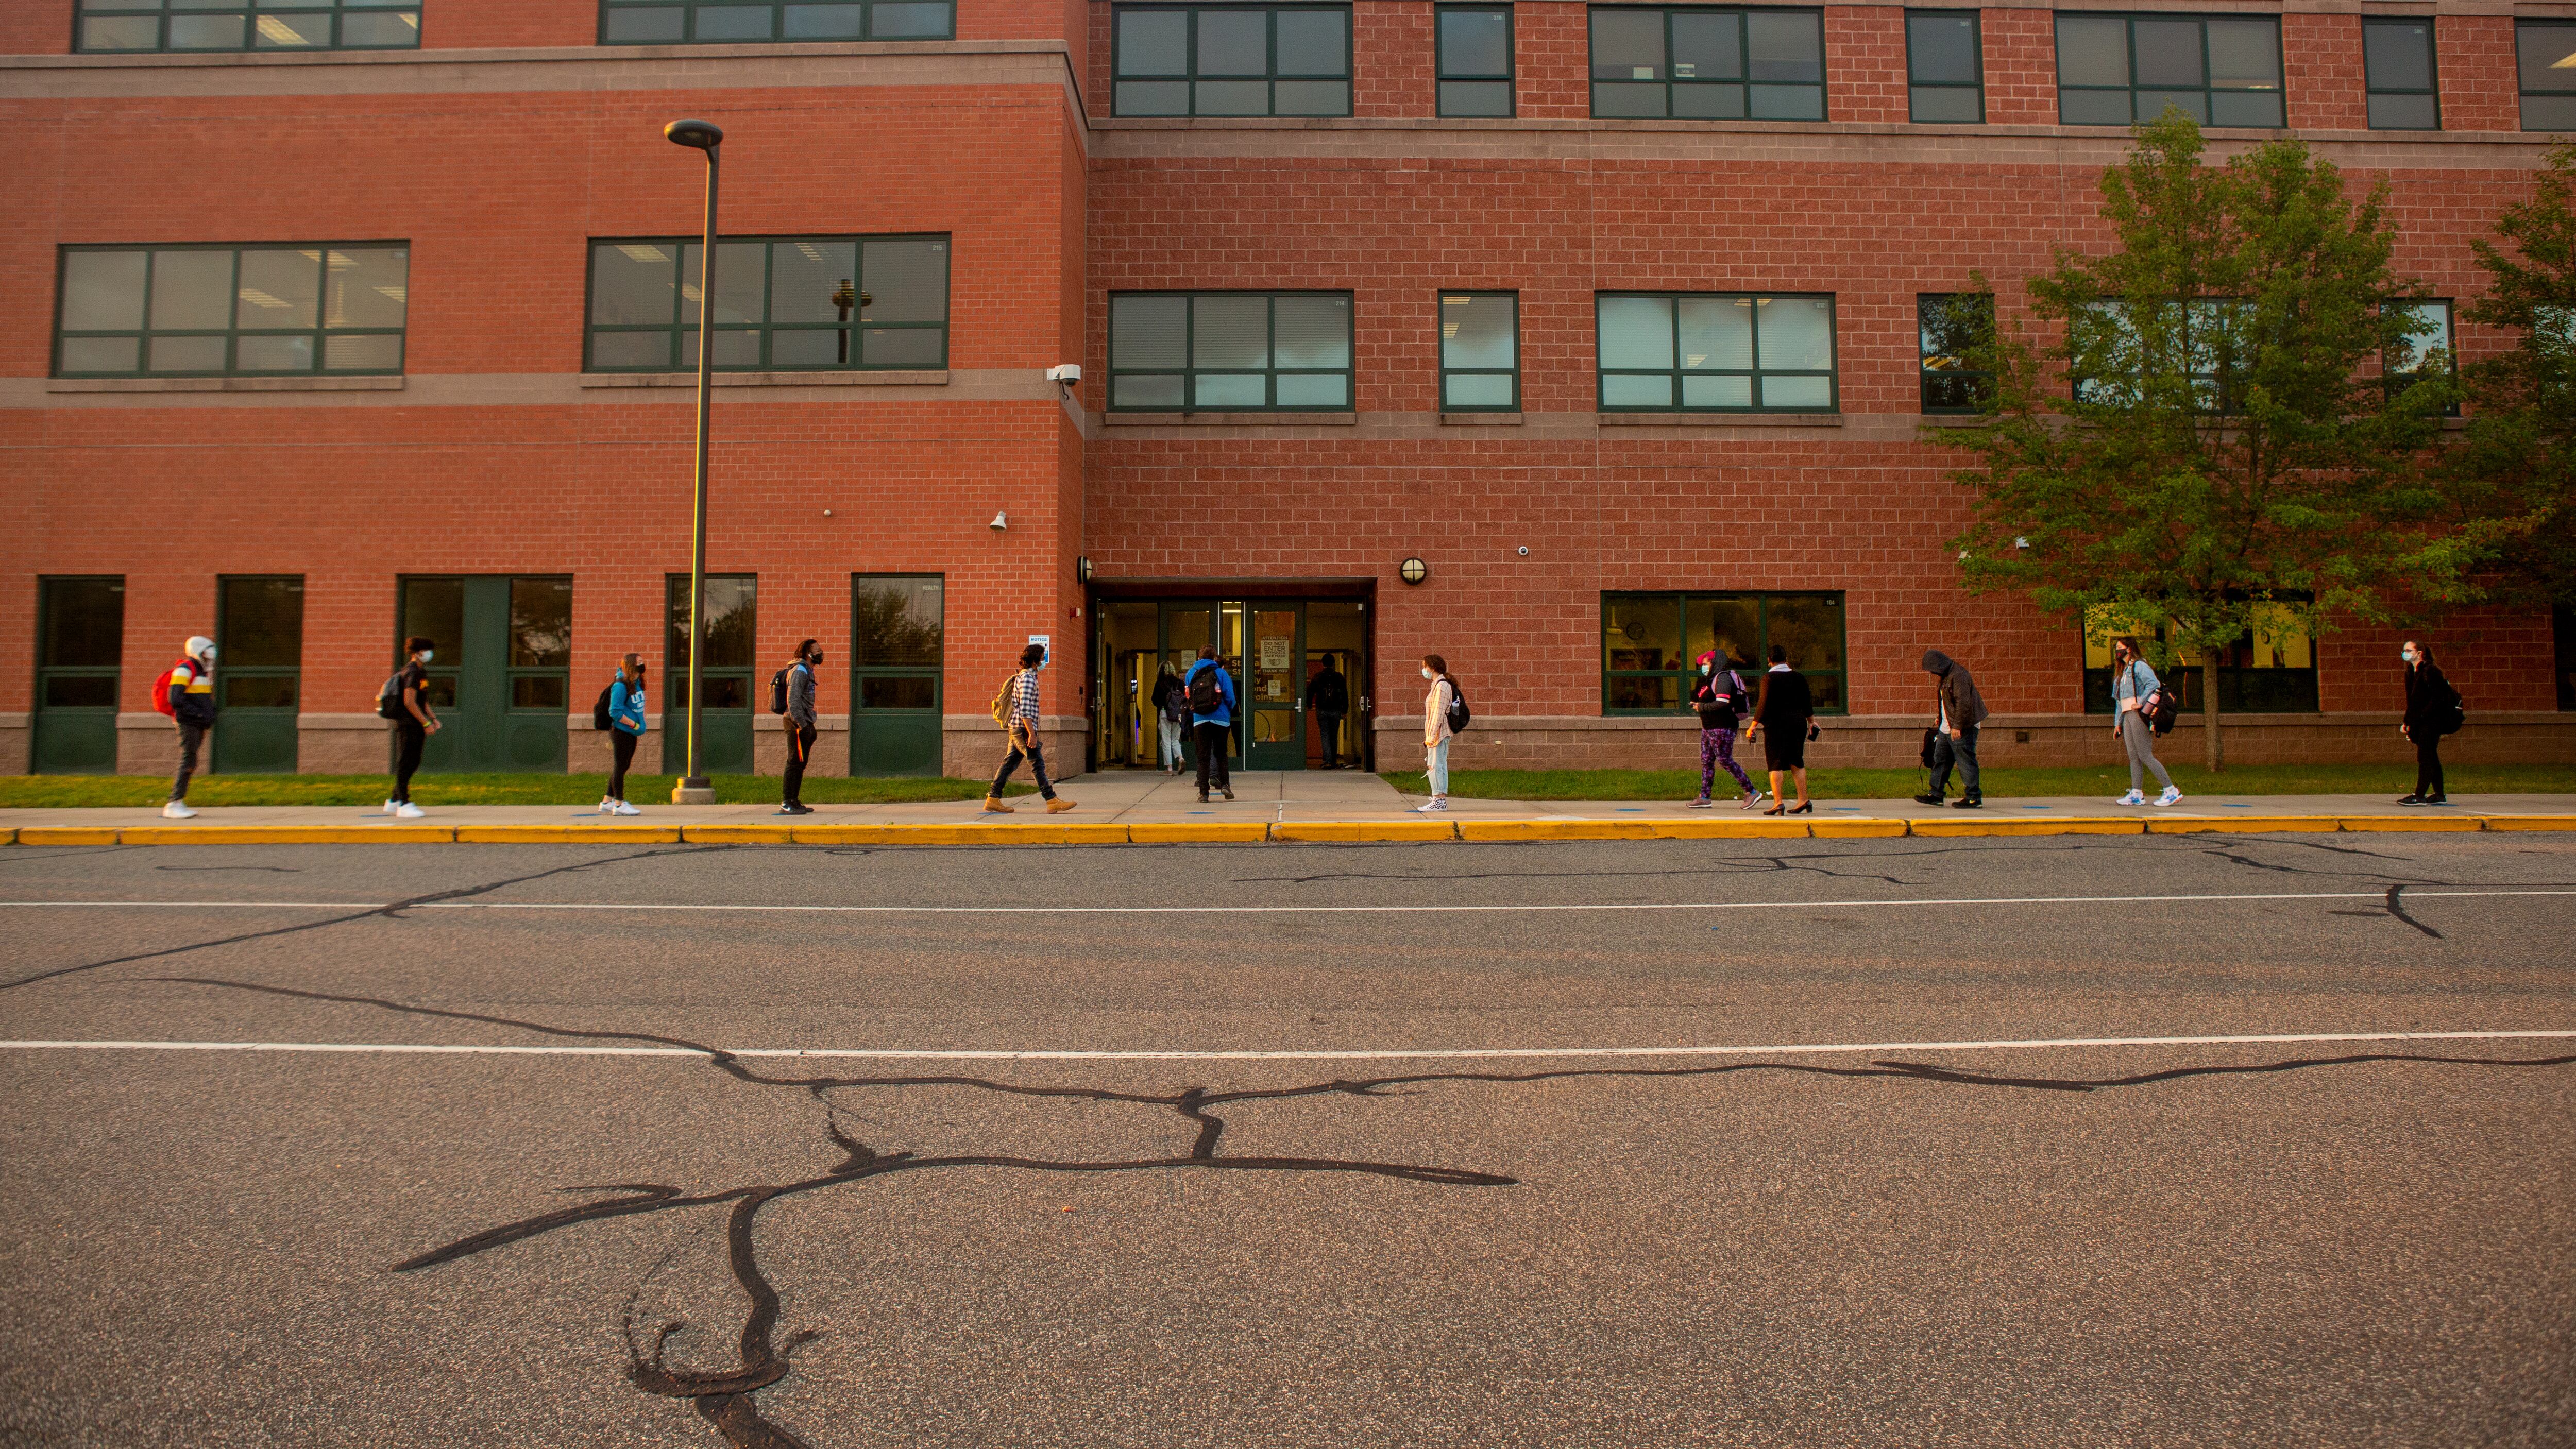 Students line up on socially distanced dots painted on the sidewalk to wait their turn to be scanned by a temperature screener before classes.